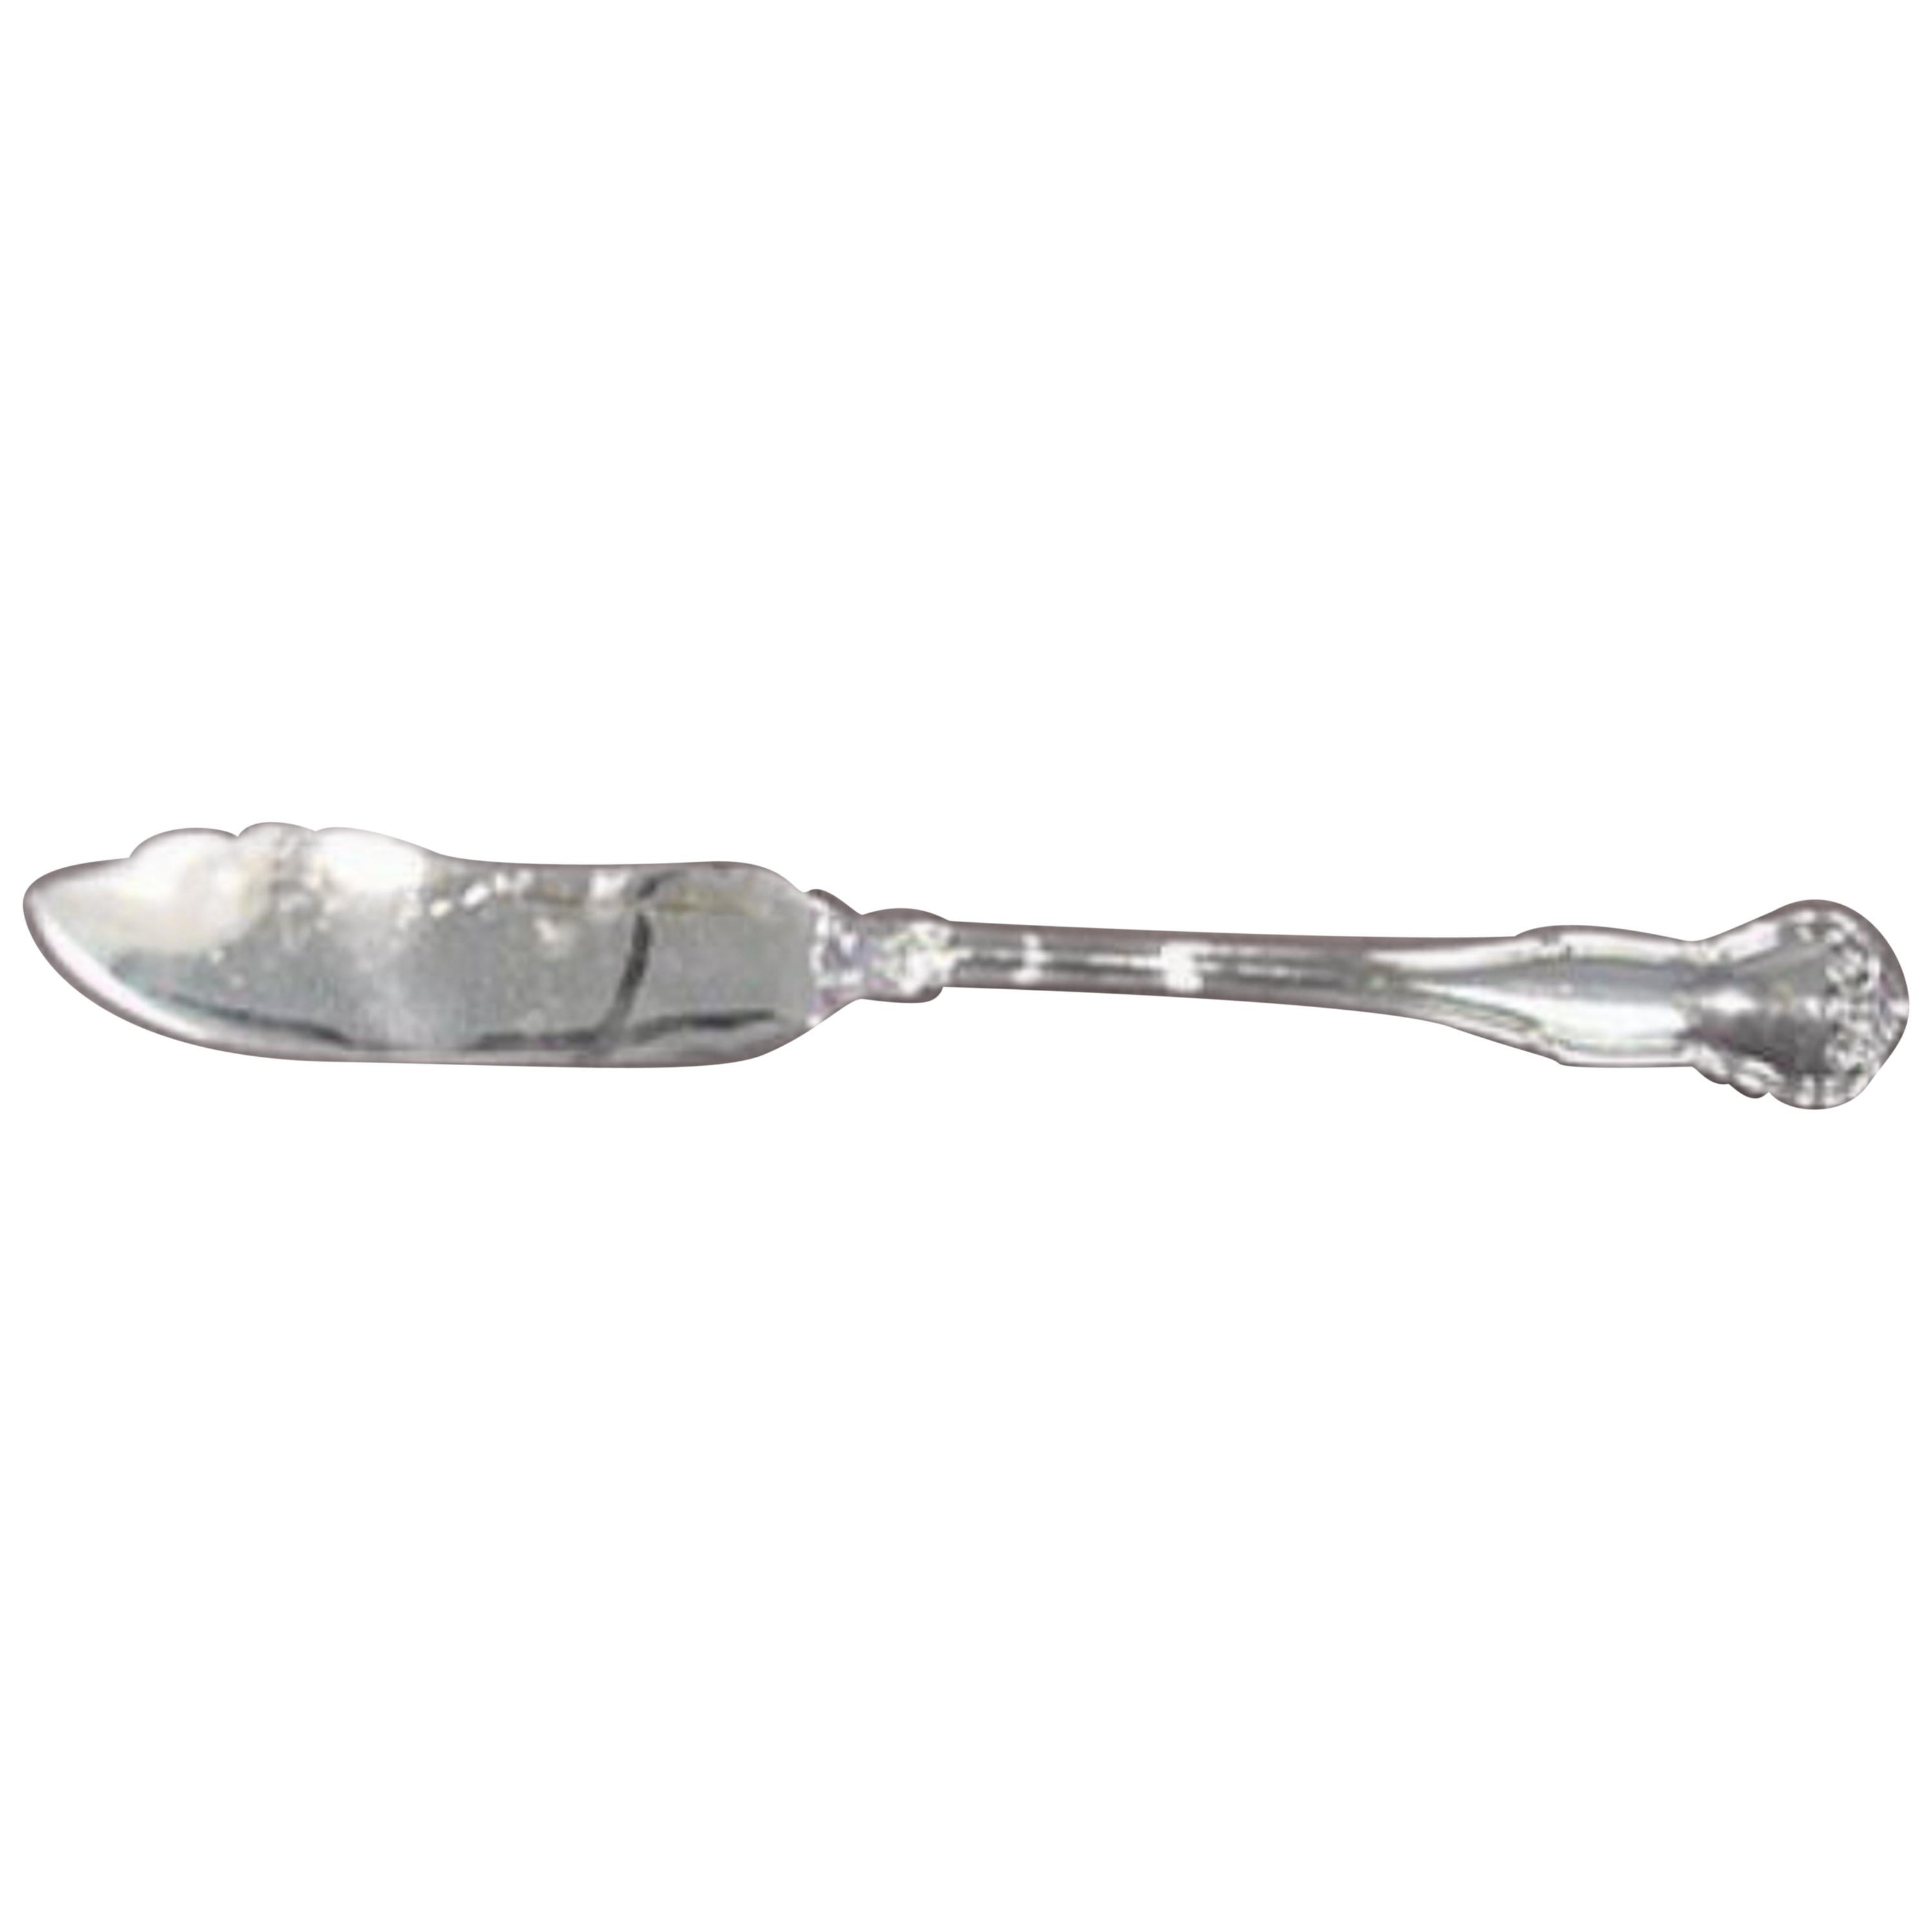 Provence by Tiffany & Co. Sterling Silver Butter Spreader Flat Handle